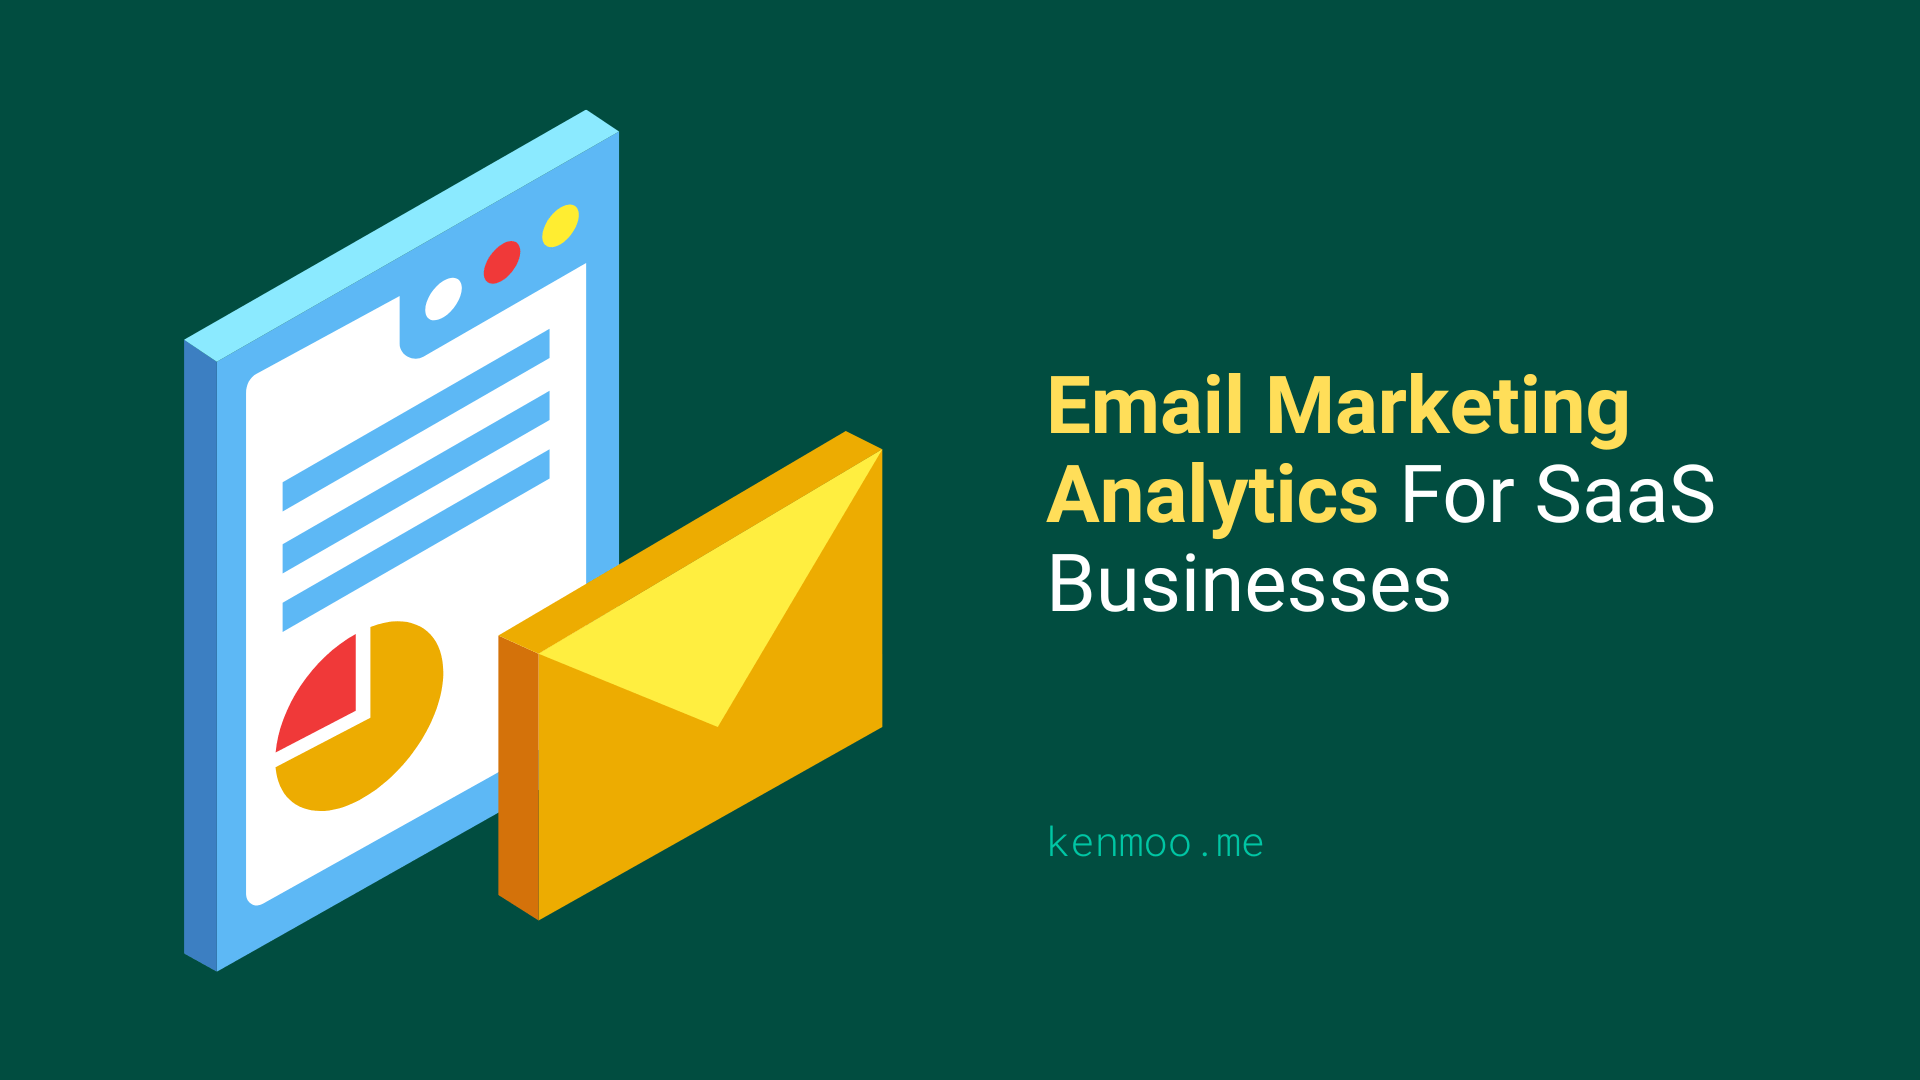 Email Marketing Analytics For SaaS Businesses